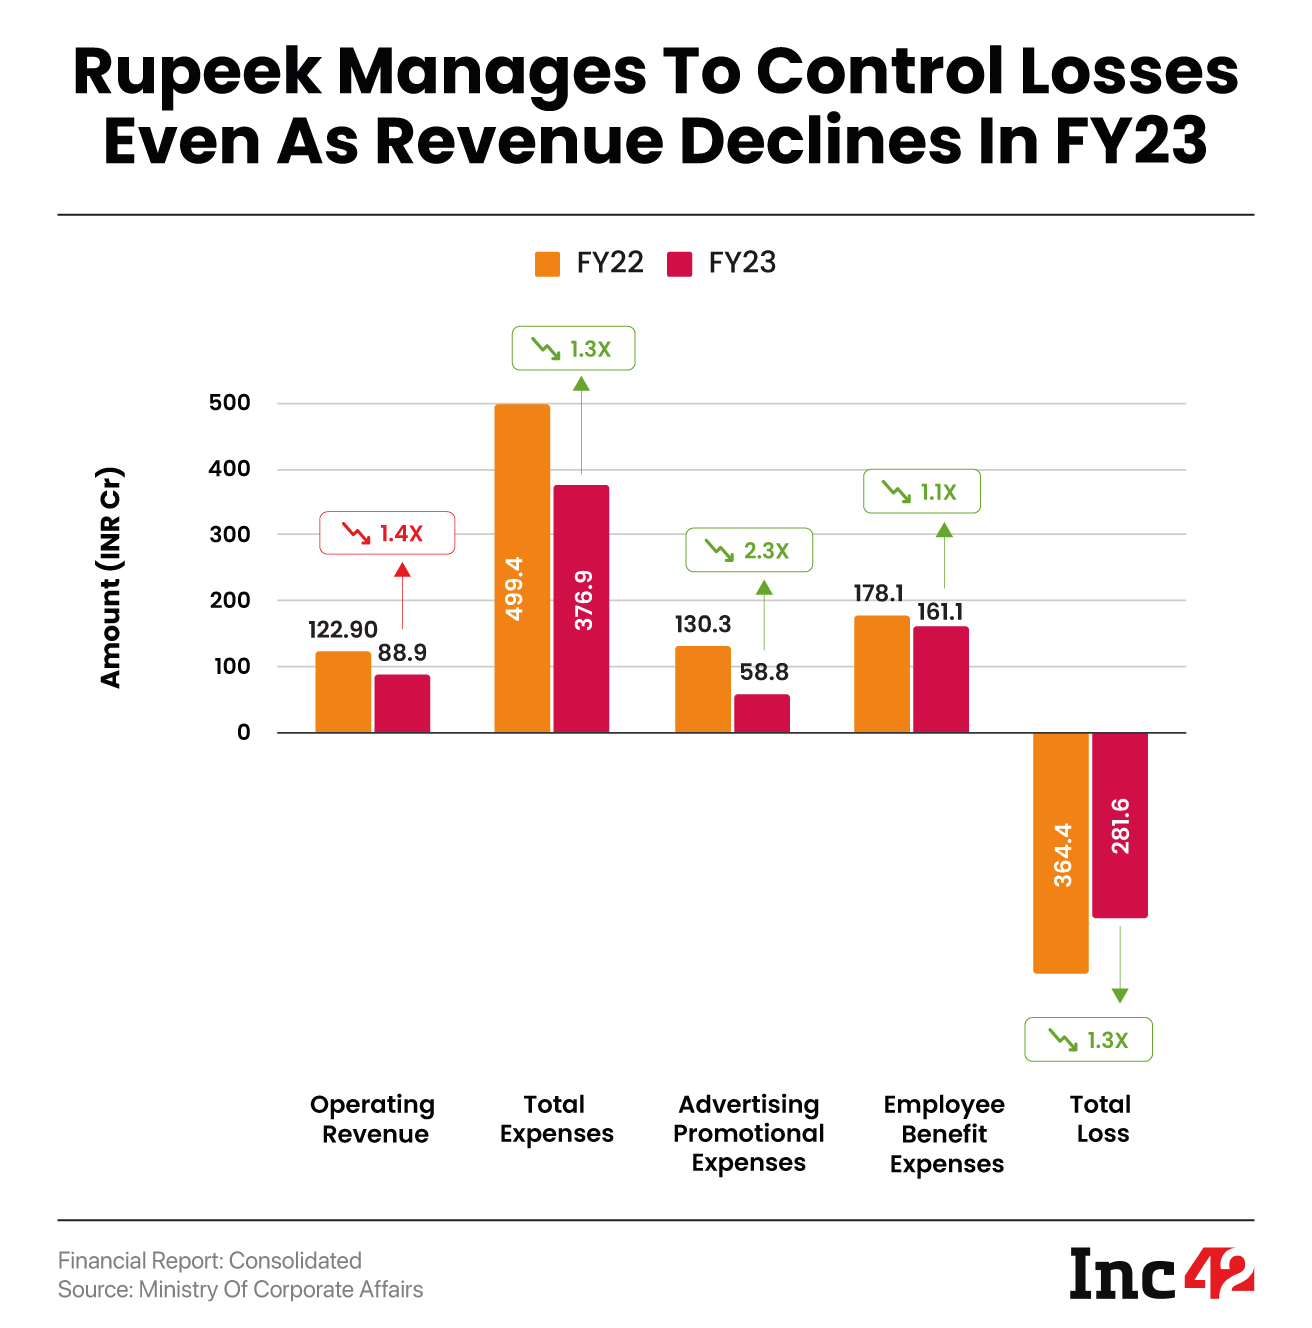 Rupeek Manages To Control Losses Even As Revenue Declines In FY23